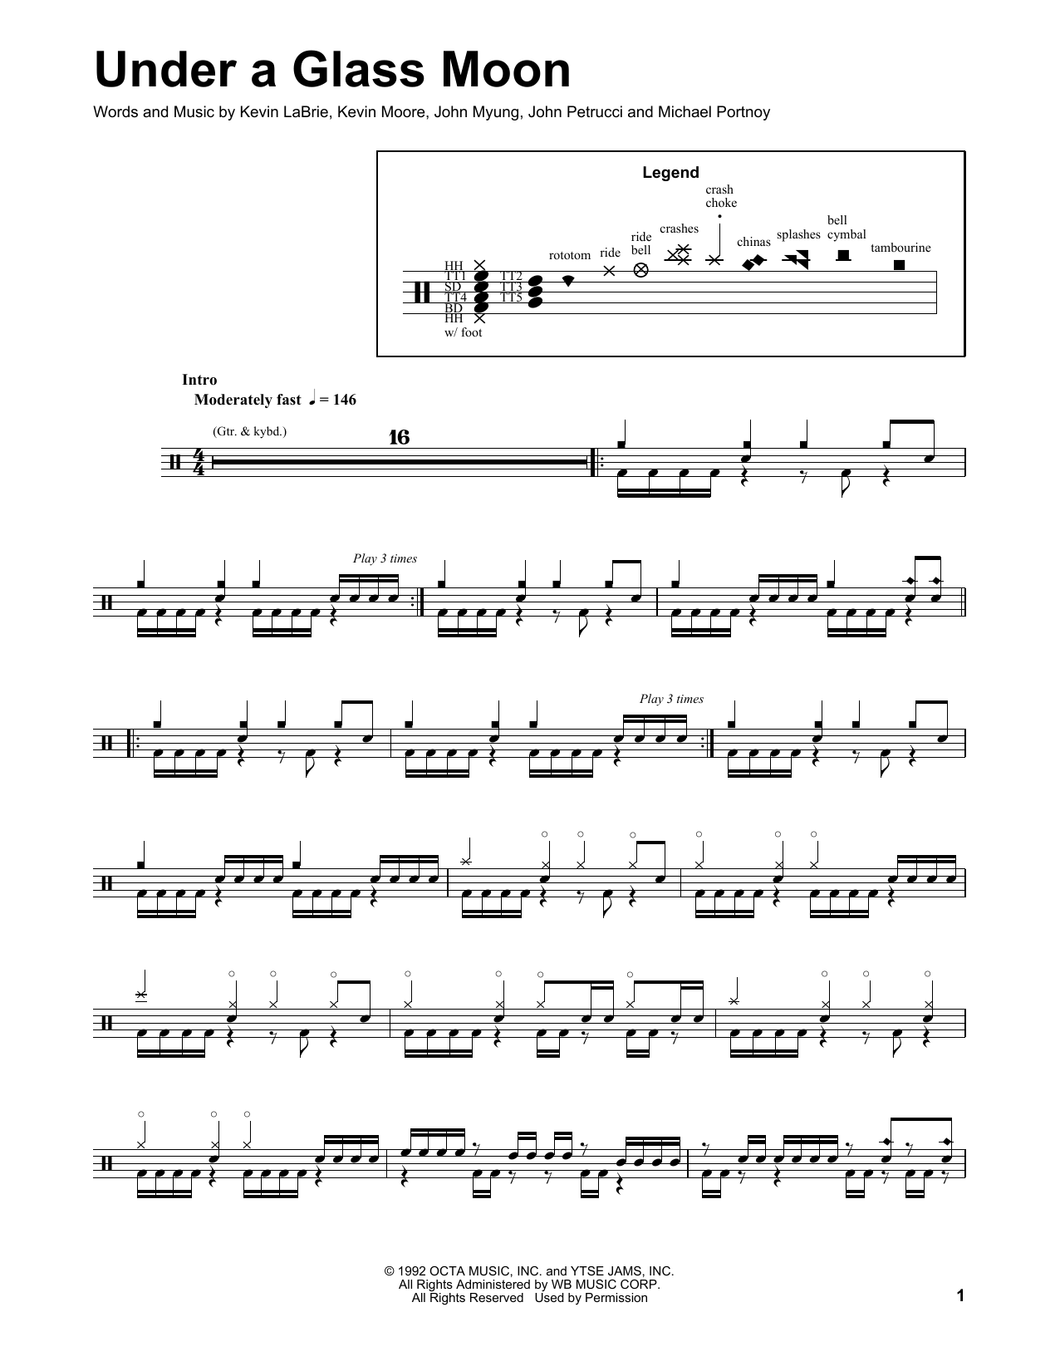 Under a Glass Moon - Dream Theater - Full Drum Transcription / Drum Sheet Music - SheetMusicDirect DT